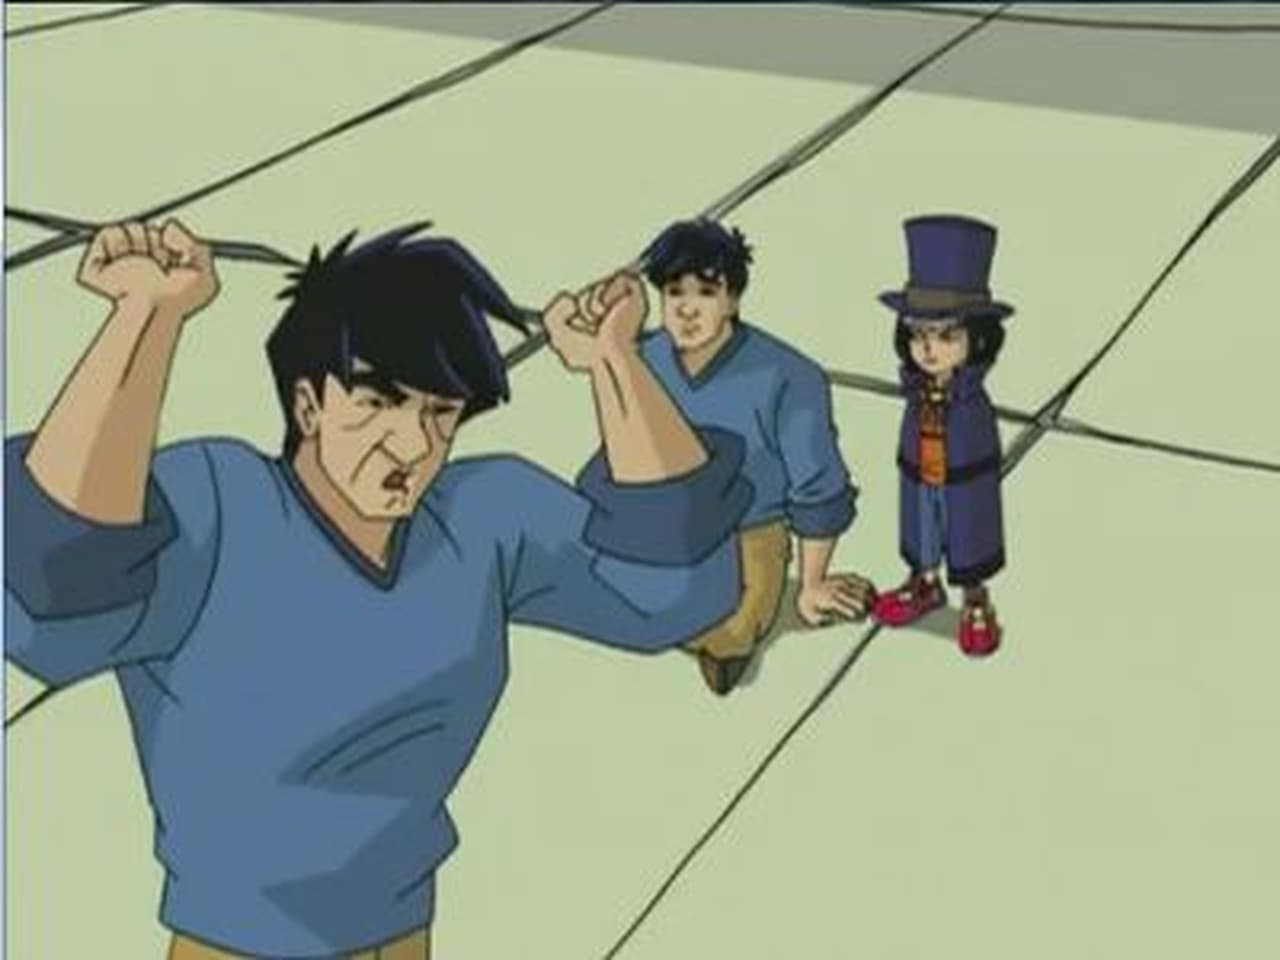 Jackie Chan Adventures - Season 2 Episode 20 : The Return of the Pussycat